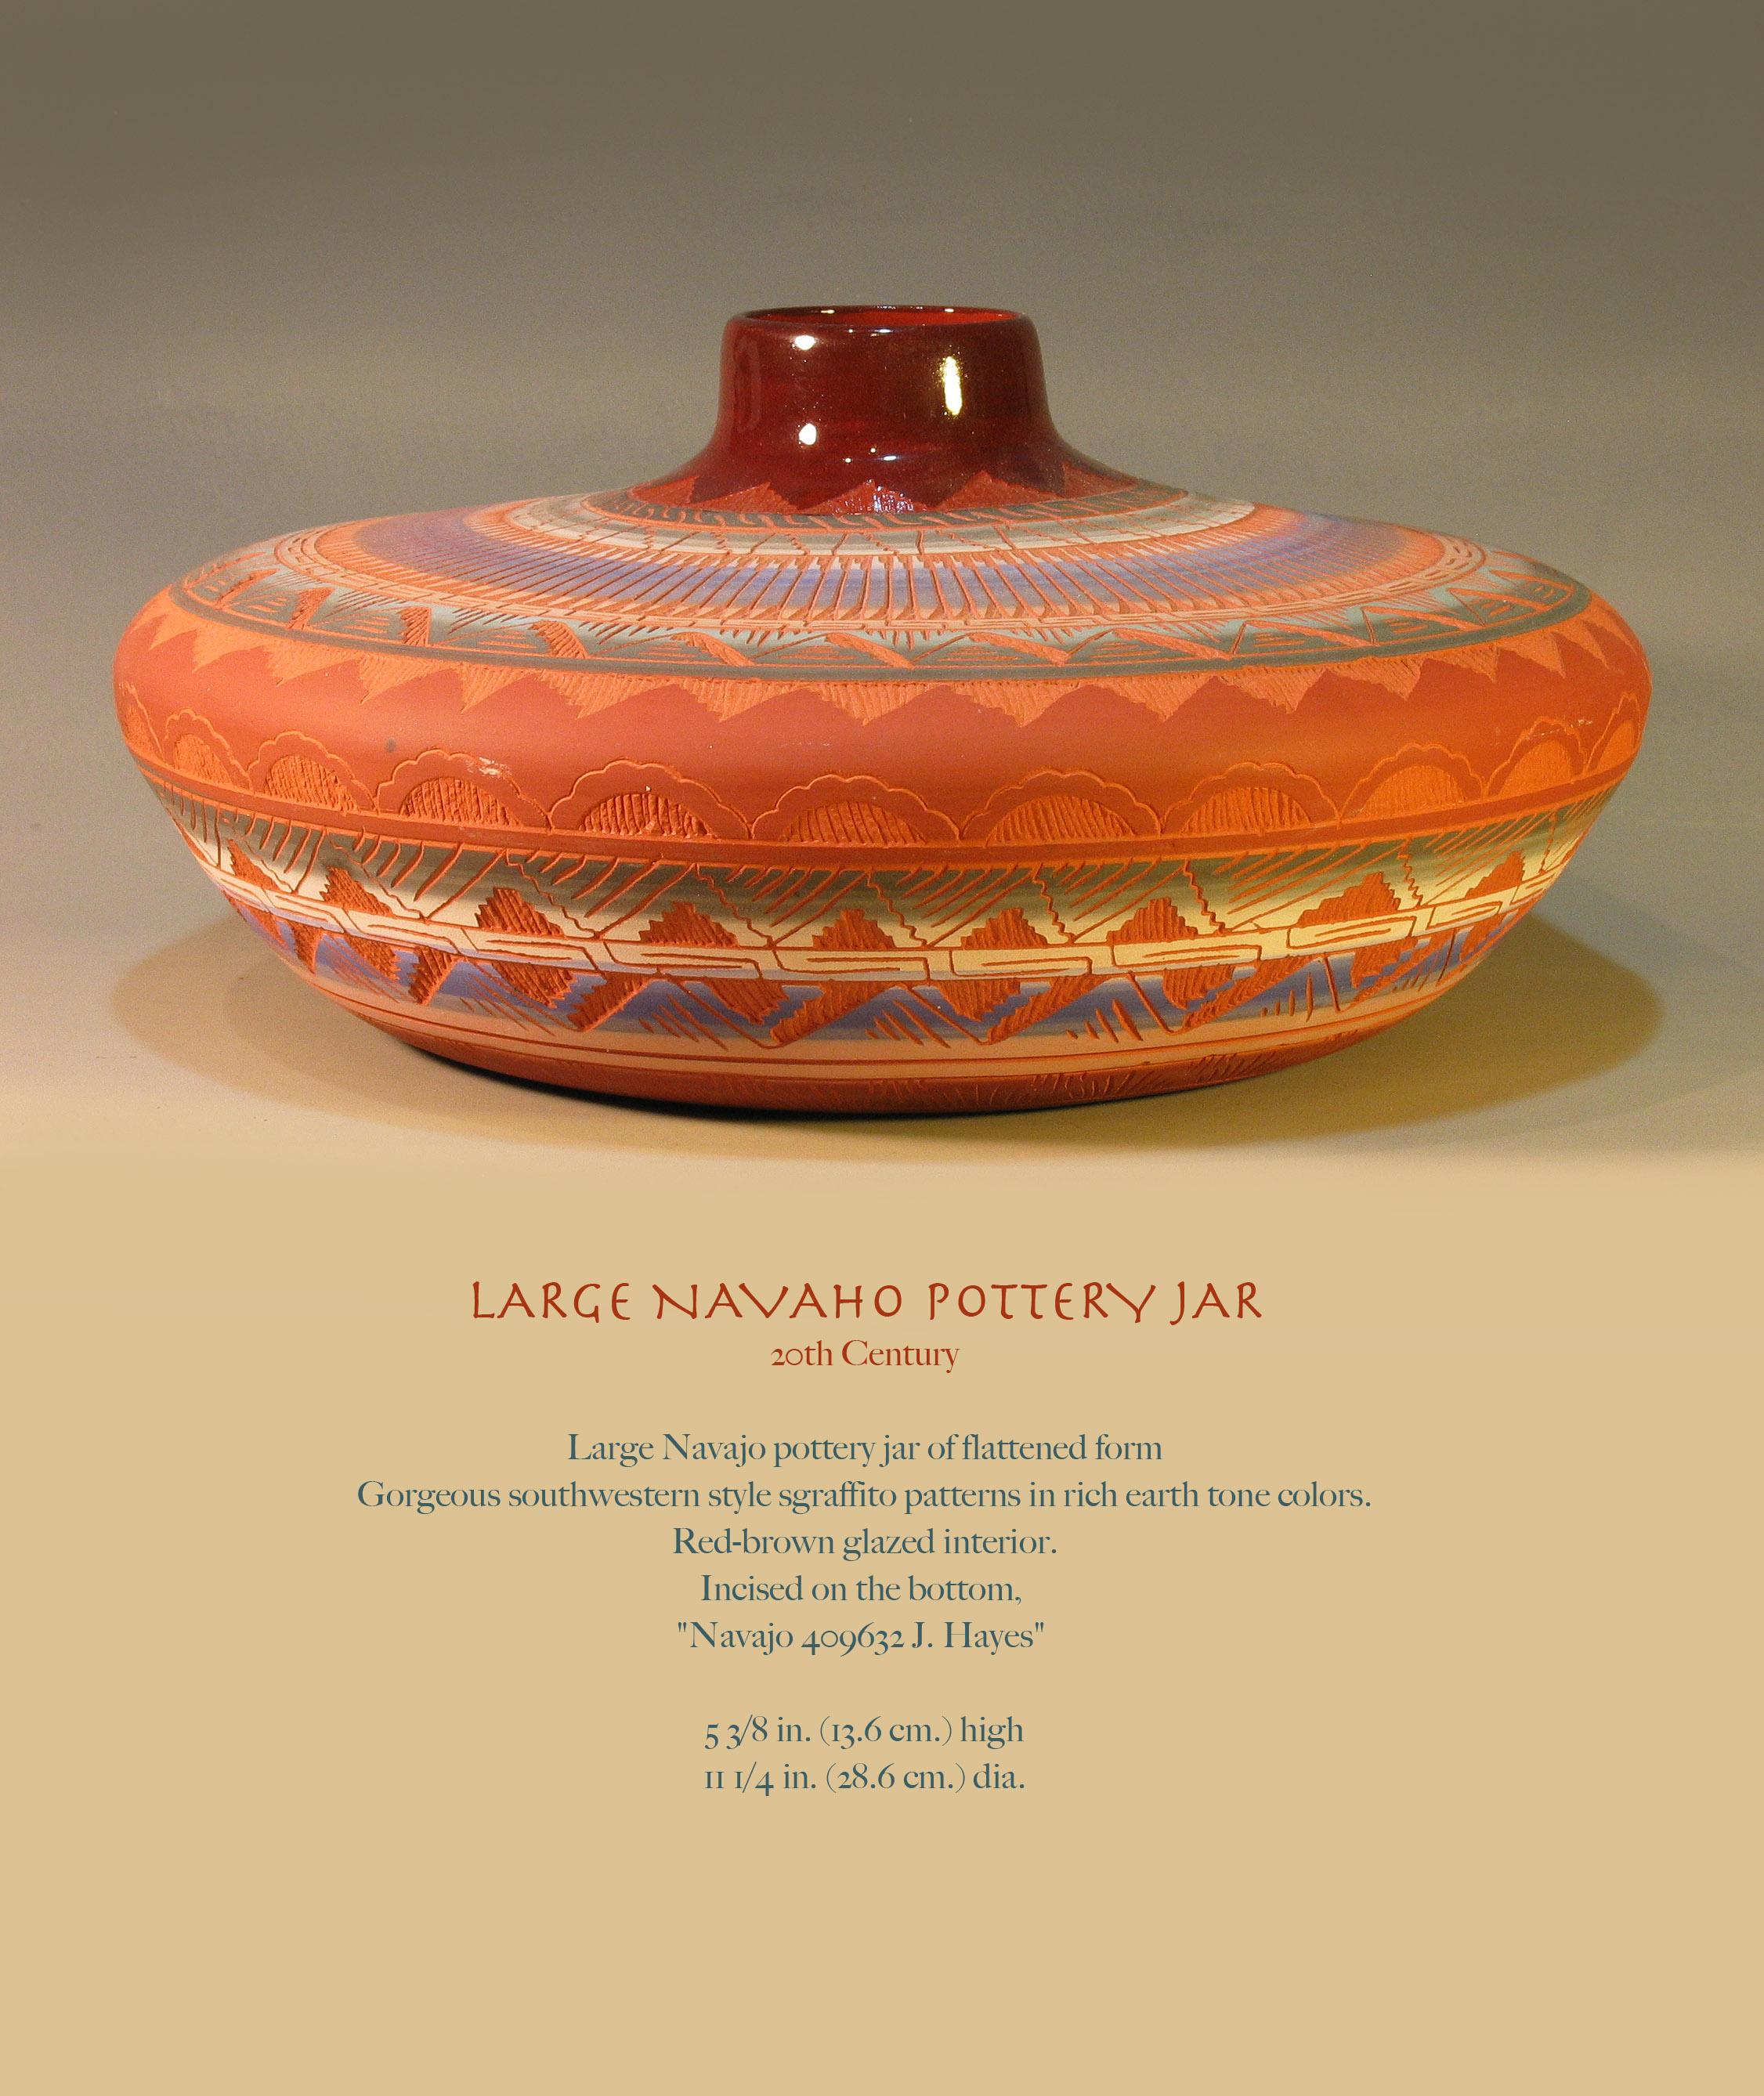 Large Navaho pottery jar
20th century

Large Navajo pottery jar of flattened form
Gorgeous southwestern style sgraffito patterns in rich earth tone colors.
Red-brown glazed interior.
Incised on the bottom, 
